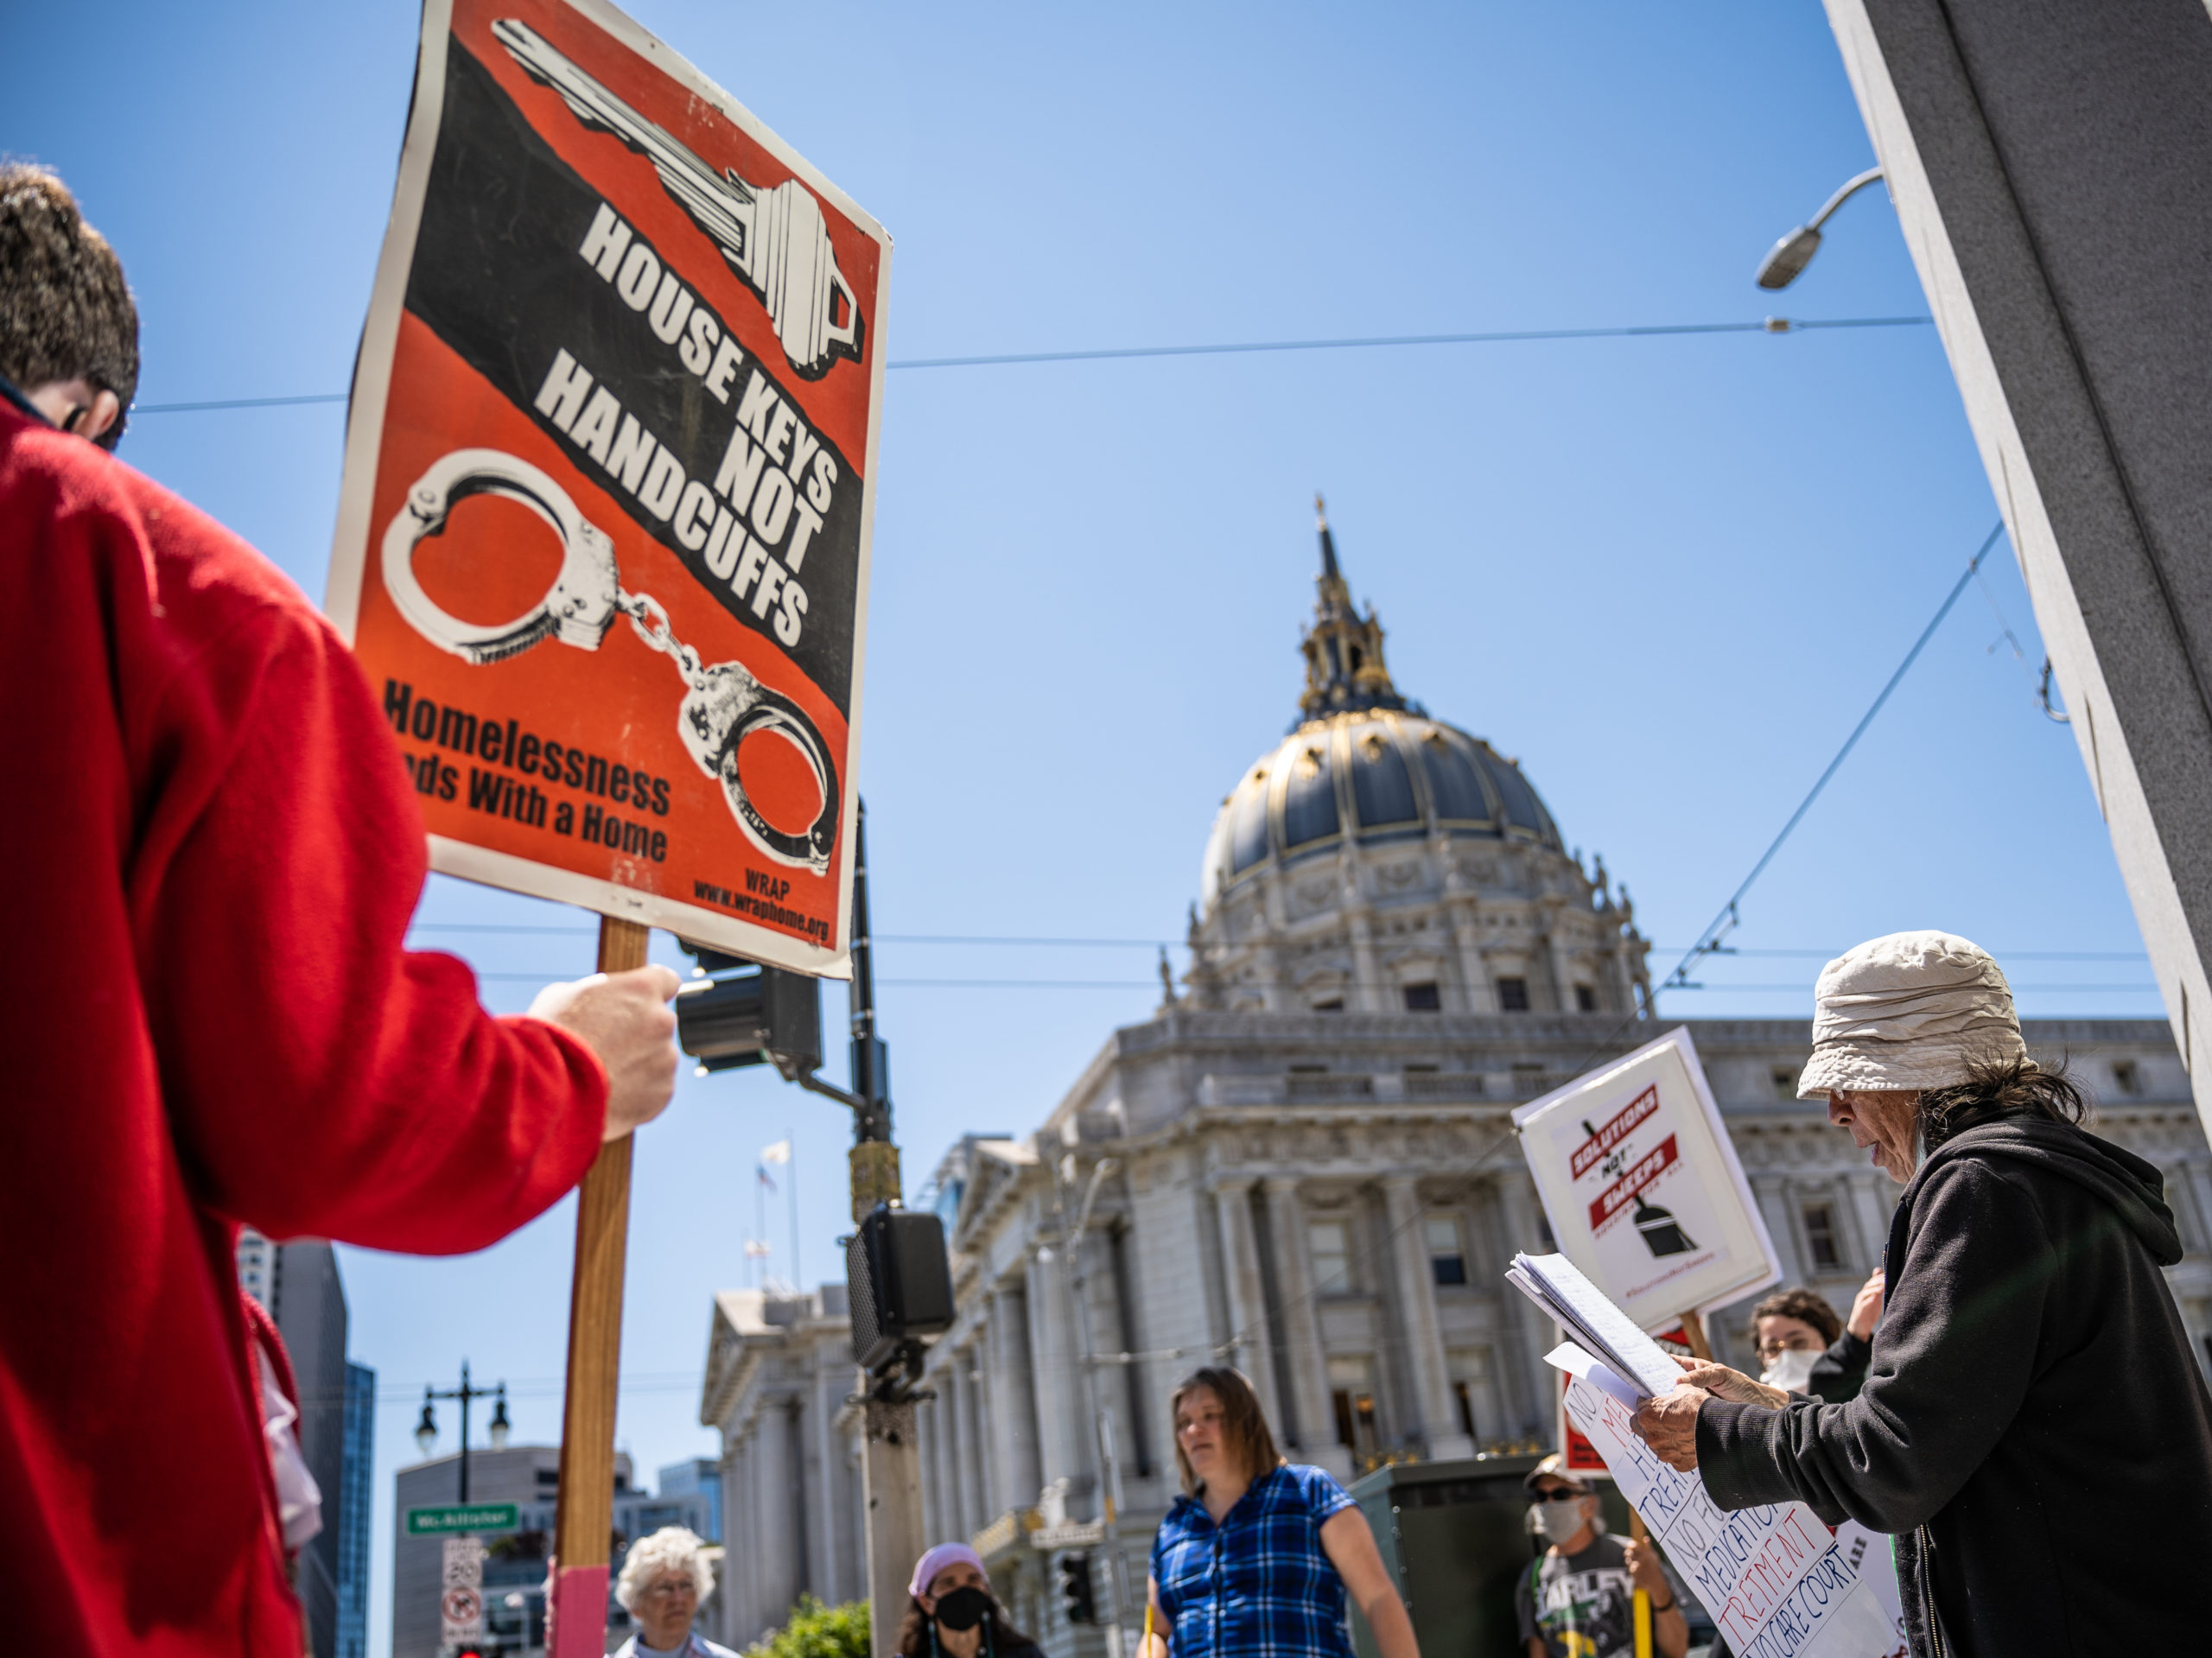 In the foreground we see a figure holding a sign that reads "Housekeys not Handcuffs", and a crowd is gathered. In the background San Francisco City Hall seems to loom.